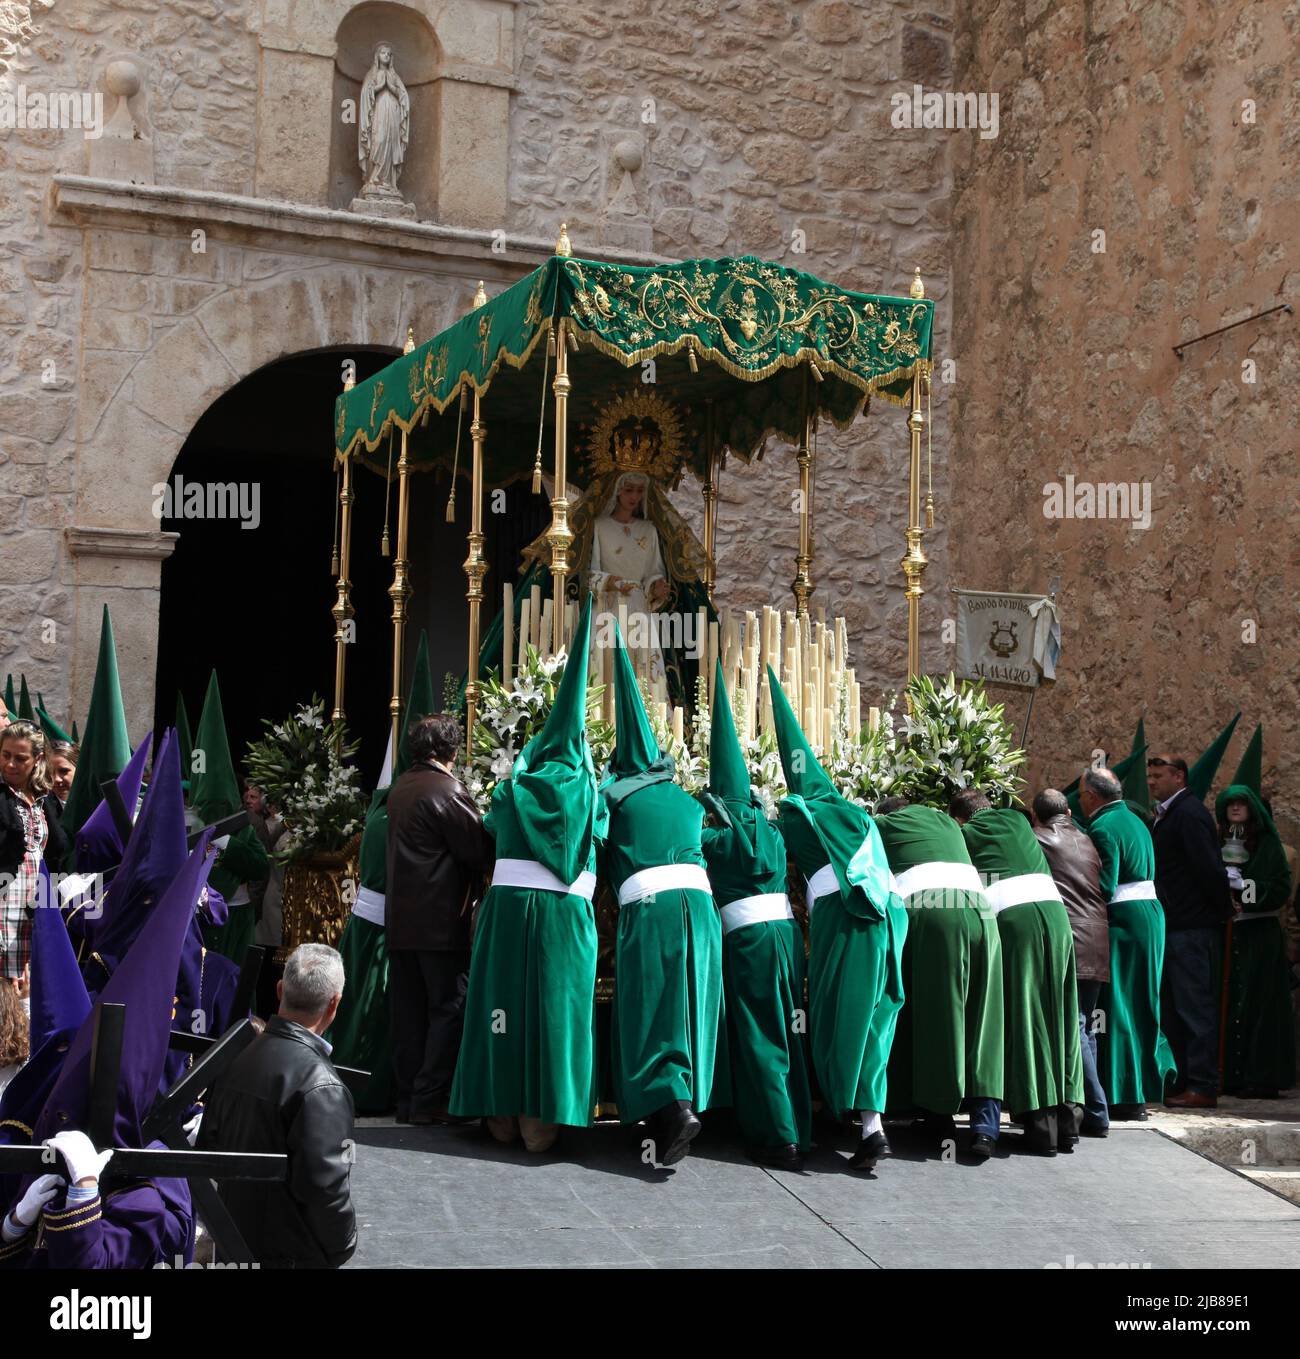 ALMAGRO, SPAIN - APRIL 10 - 2009: Semana Santa - Holy Week, The traditional processions in the streets, April 10, 2009 in Almagro Spain Stock Photo